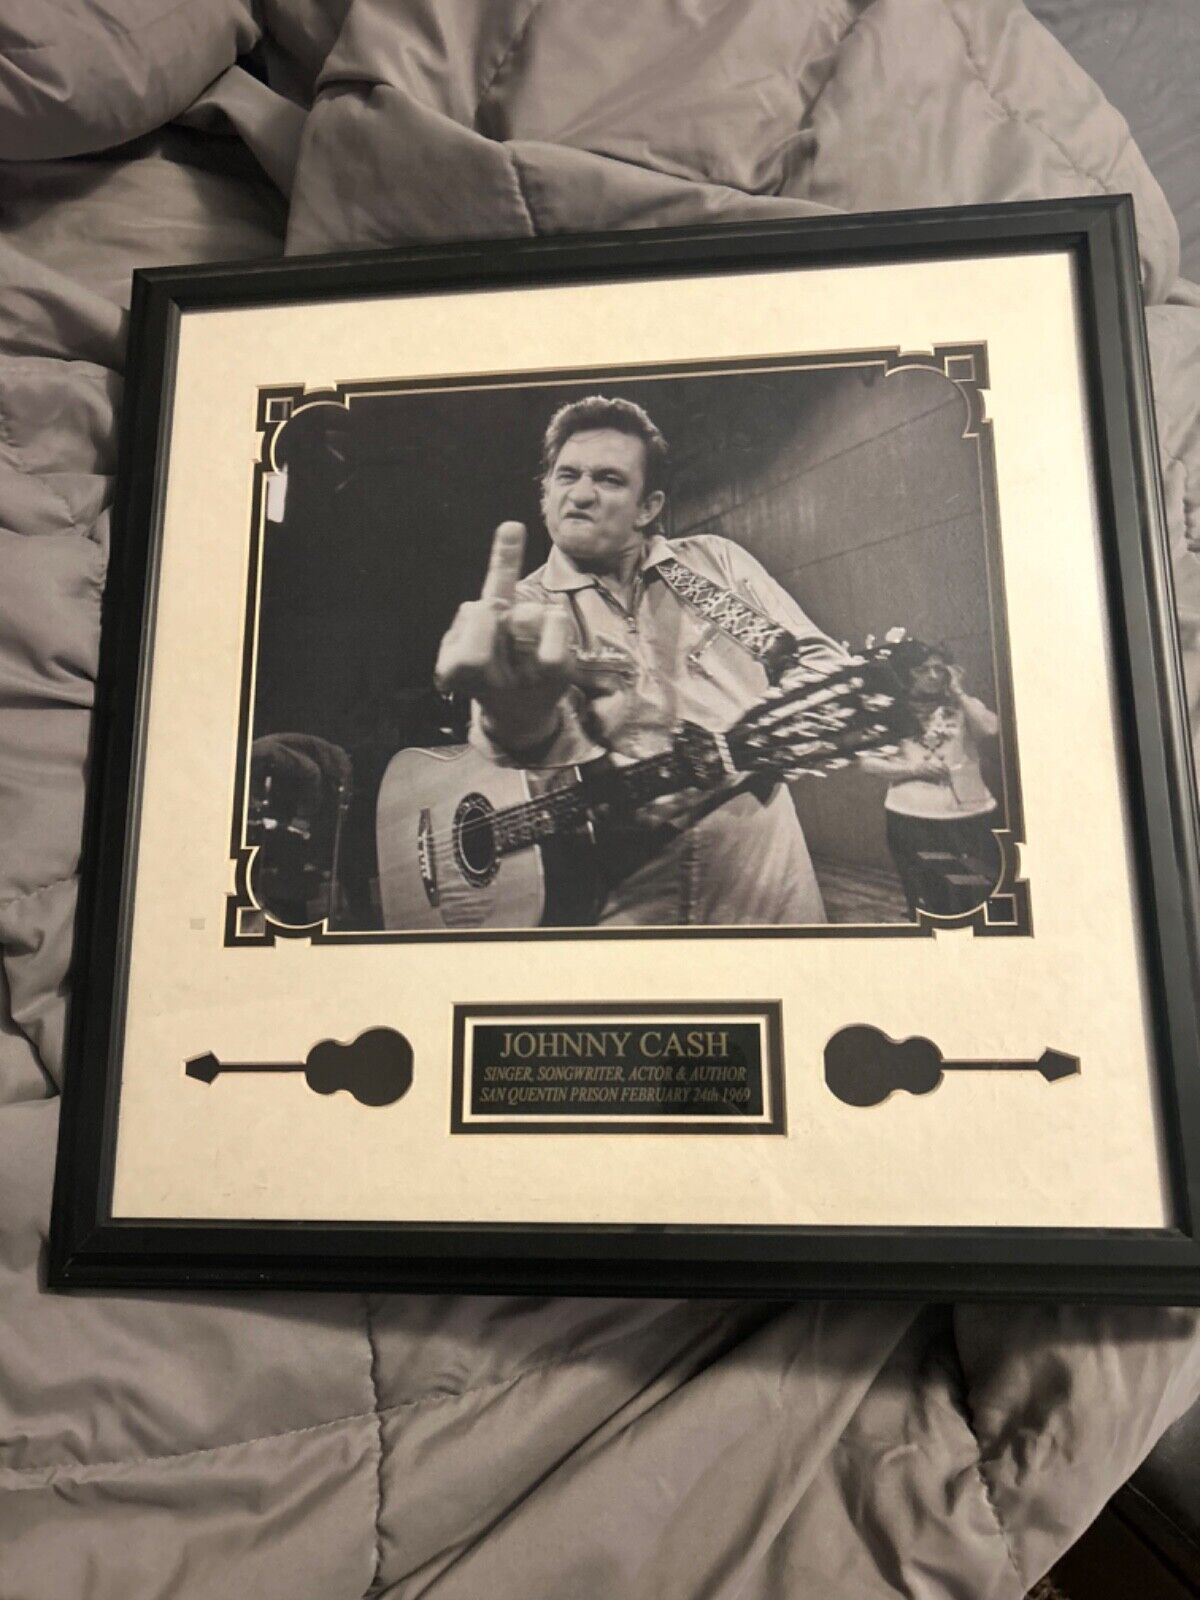 Johnny Cash custom Framed photo from San Quentin prison. Great condition